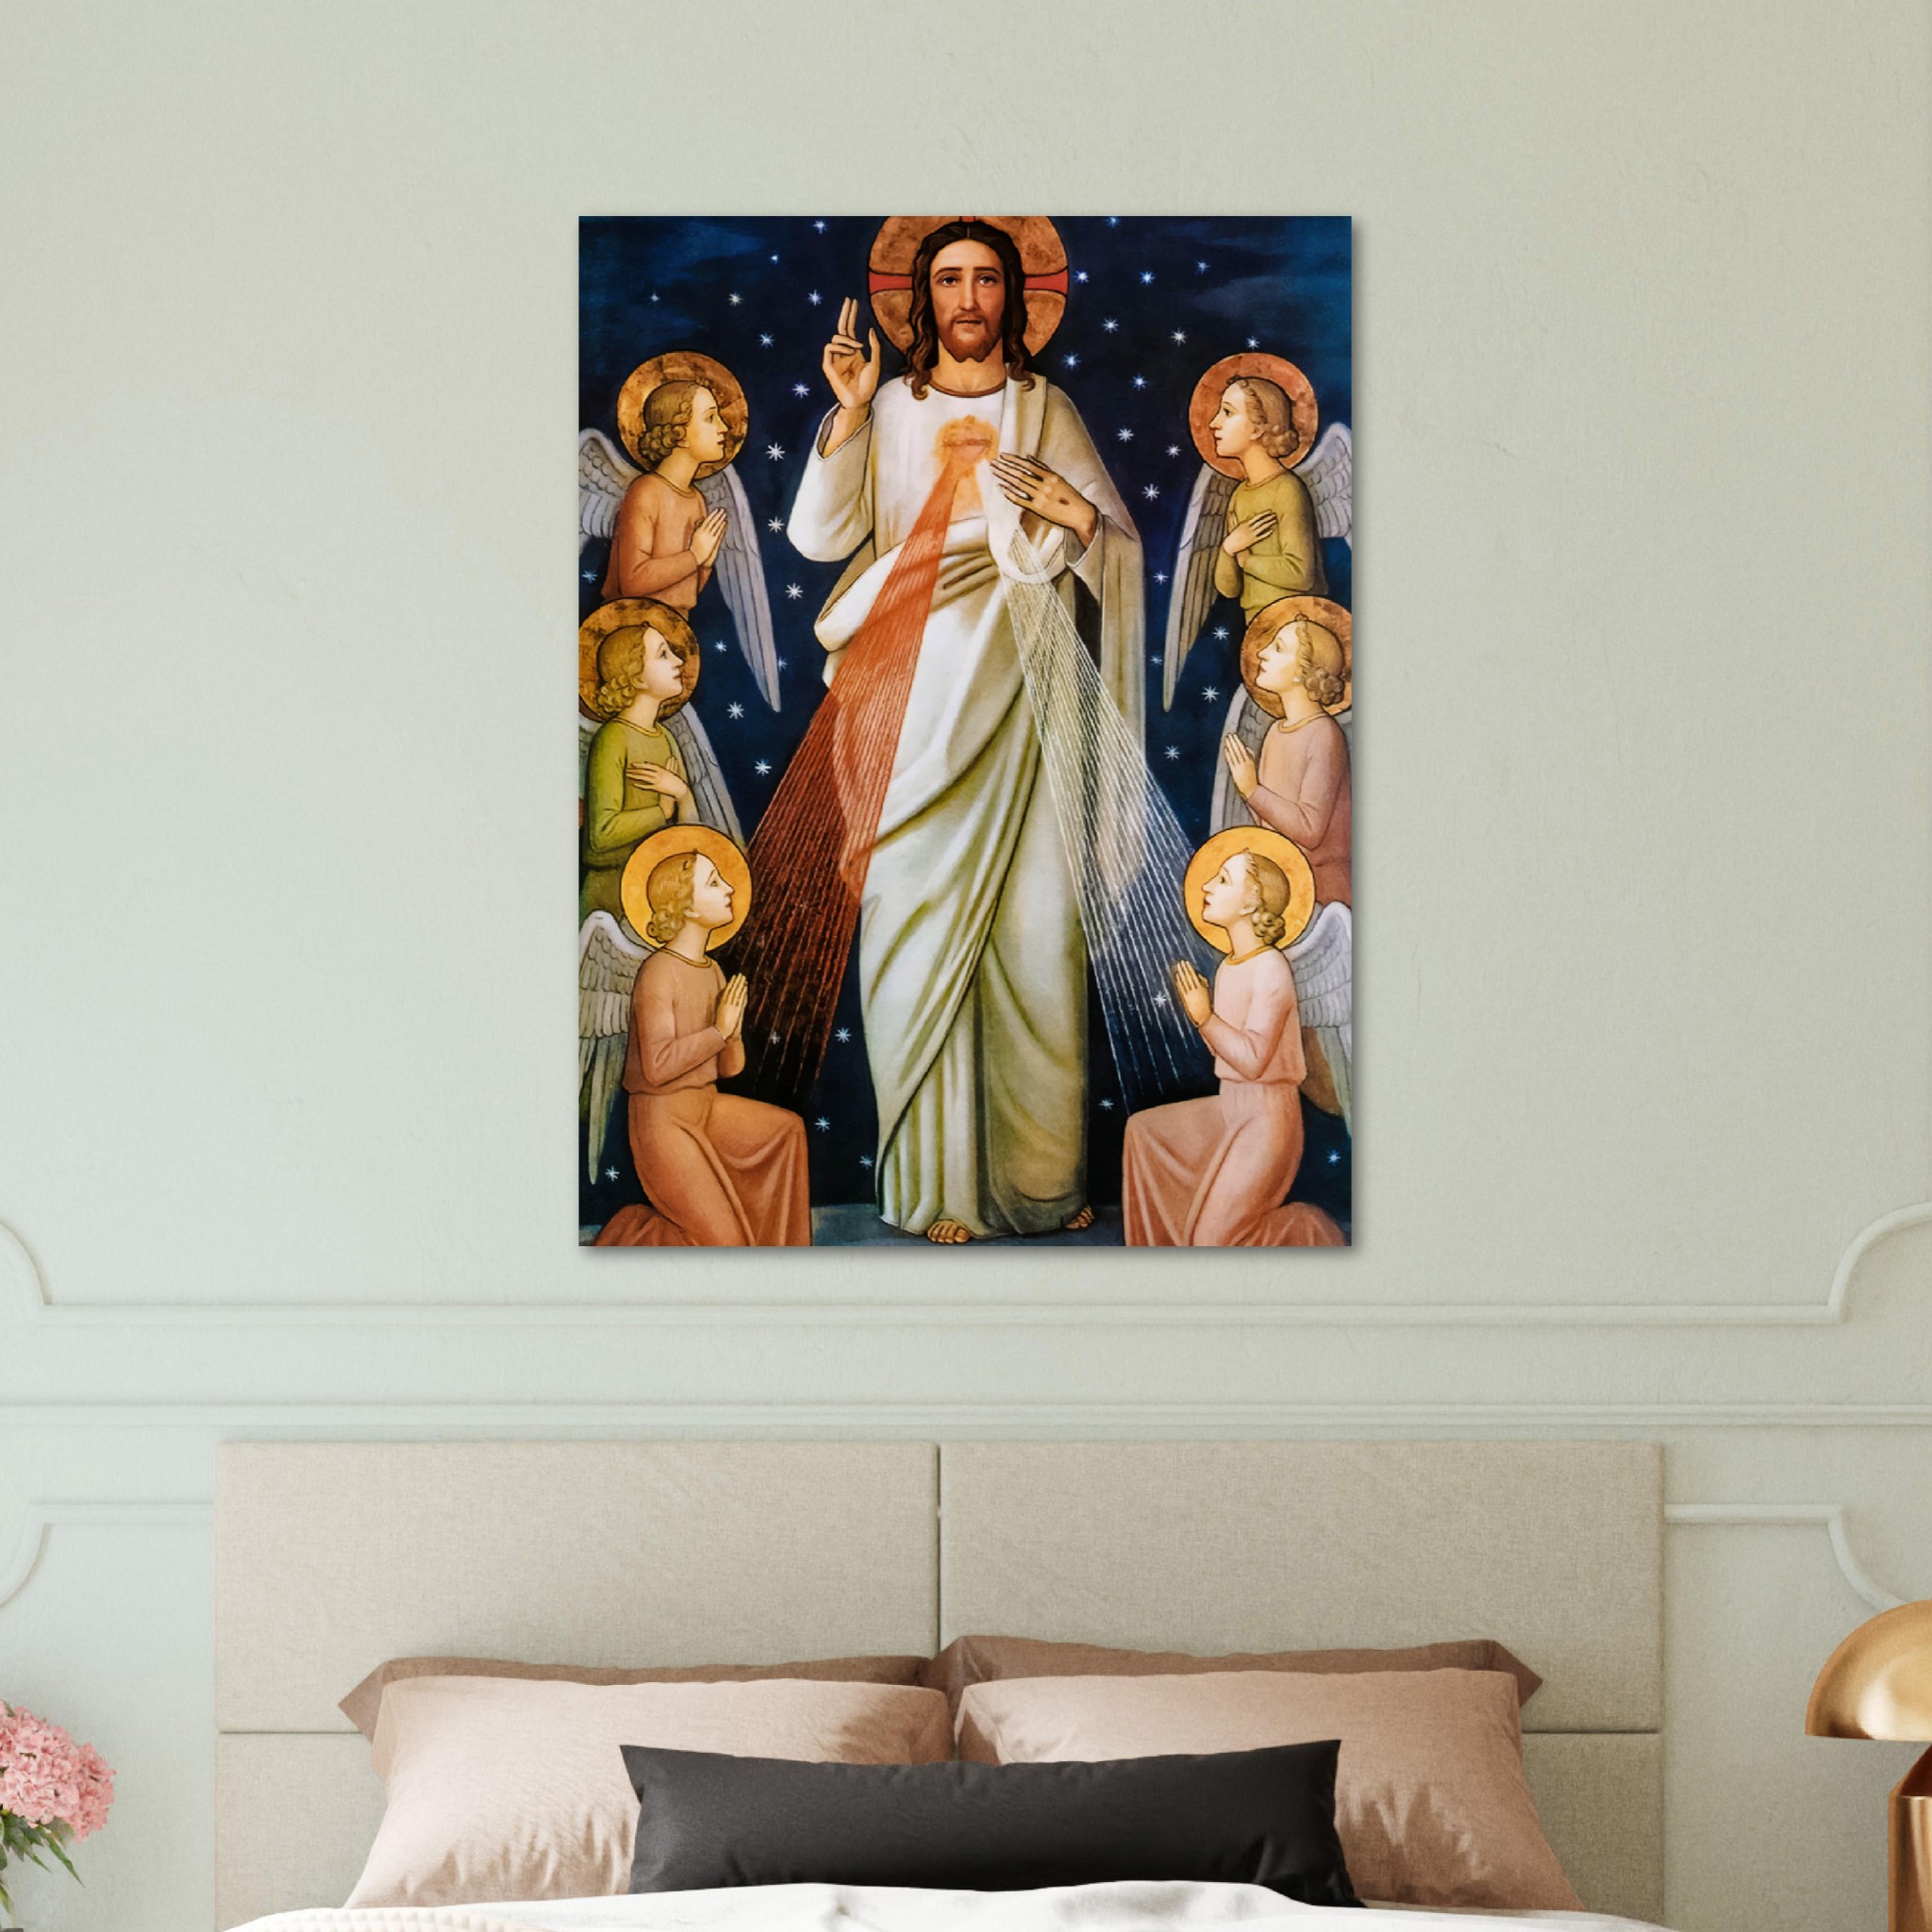 Jesus Christ King of Mercy ✠ Museum-Quality Matte Paper Poster 24x32 Museum-Quality Matte Paper Poster